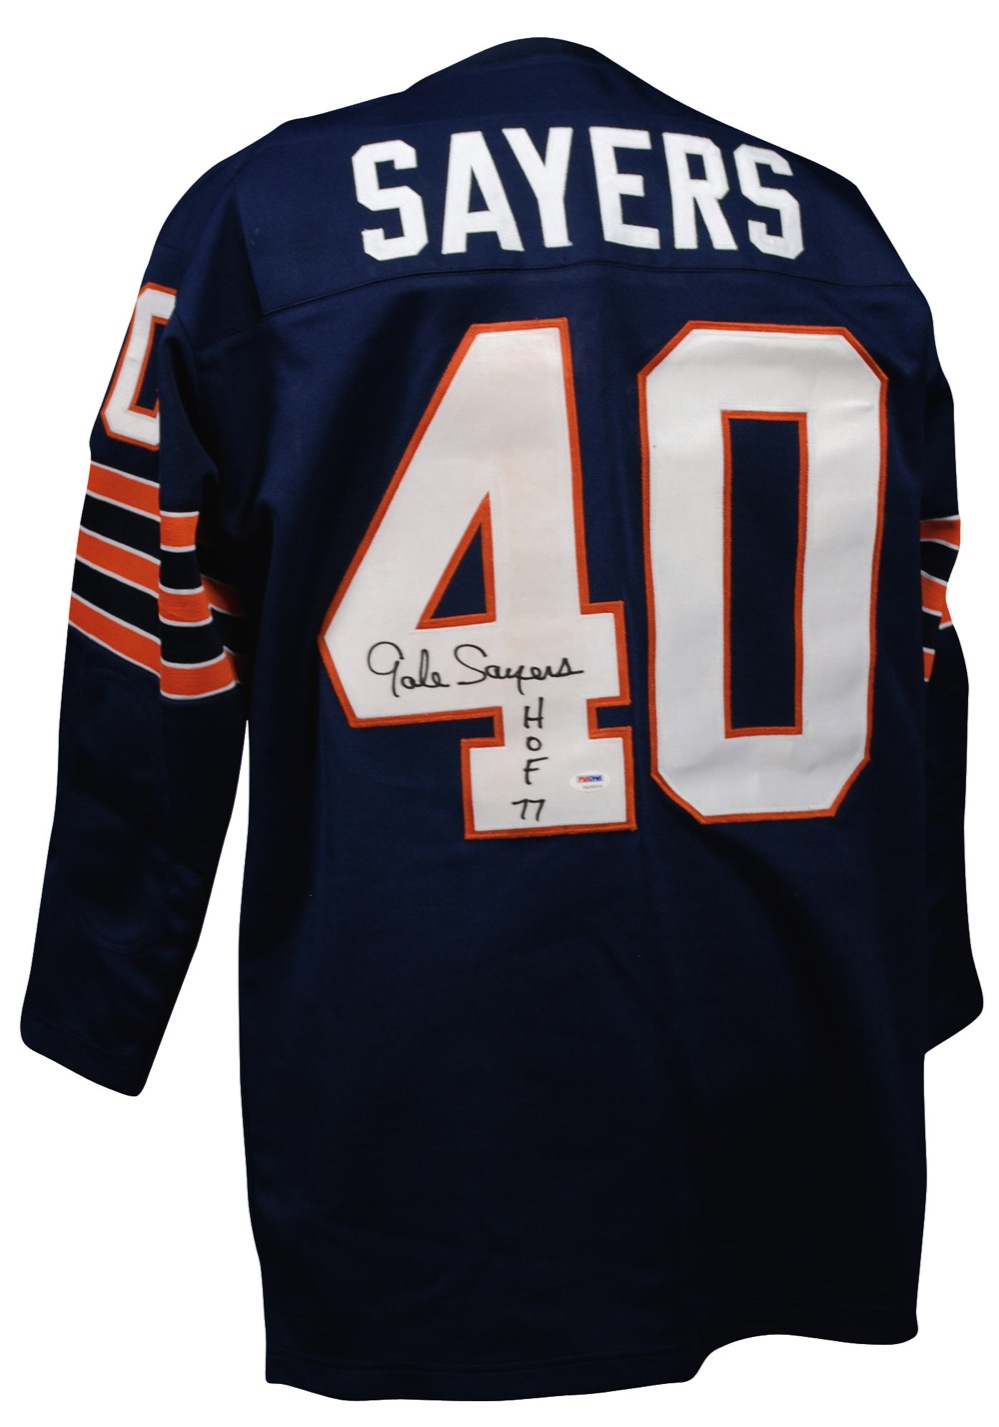 Lot #1307 Gale Sayers